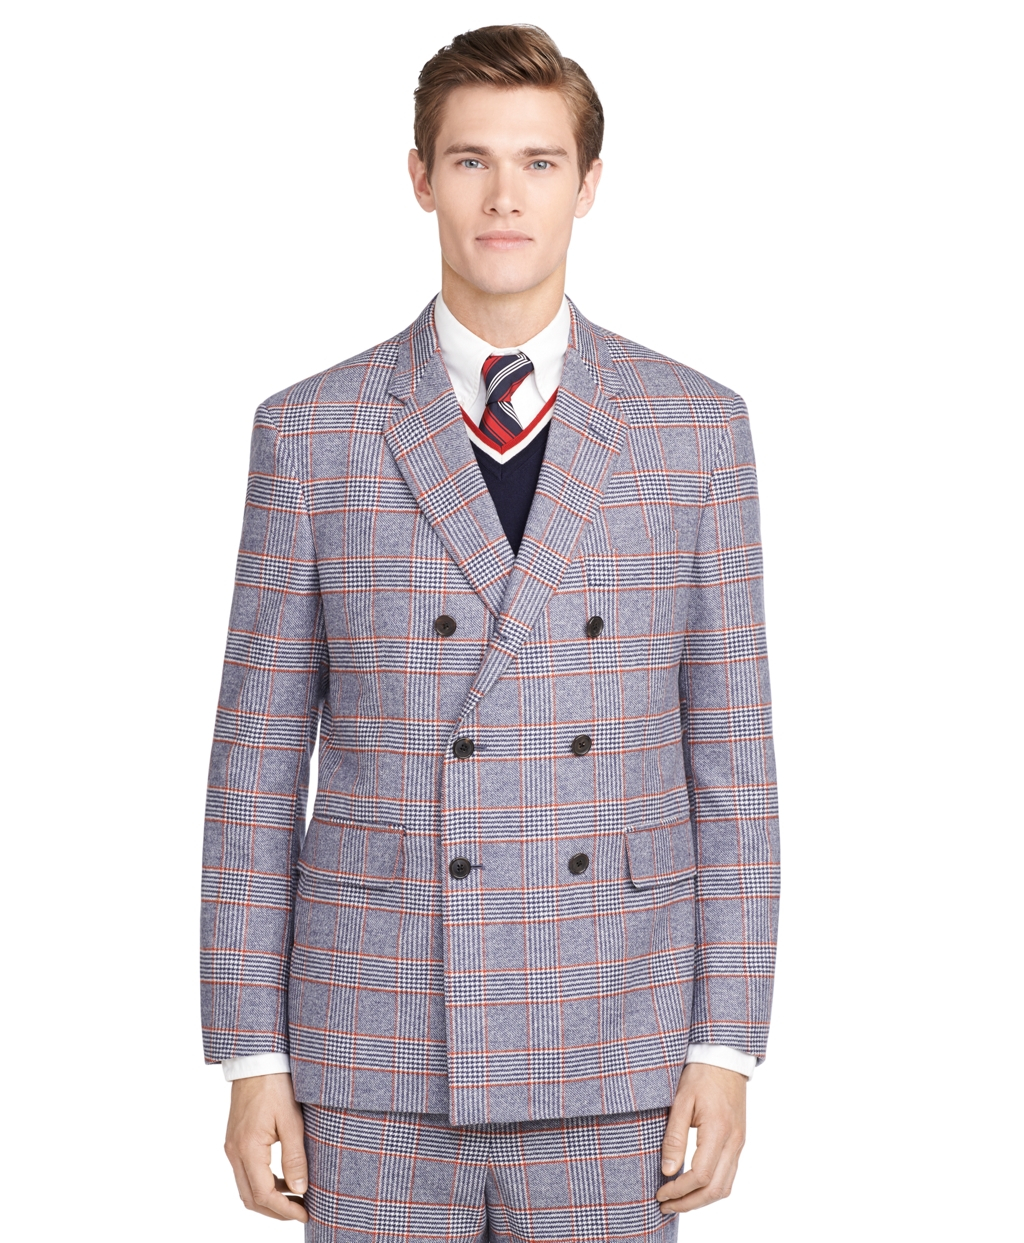 Lyst - Brooks Brothers Double-breasted Plaid Sport Coat in Blue for Men